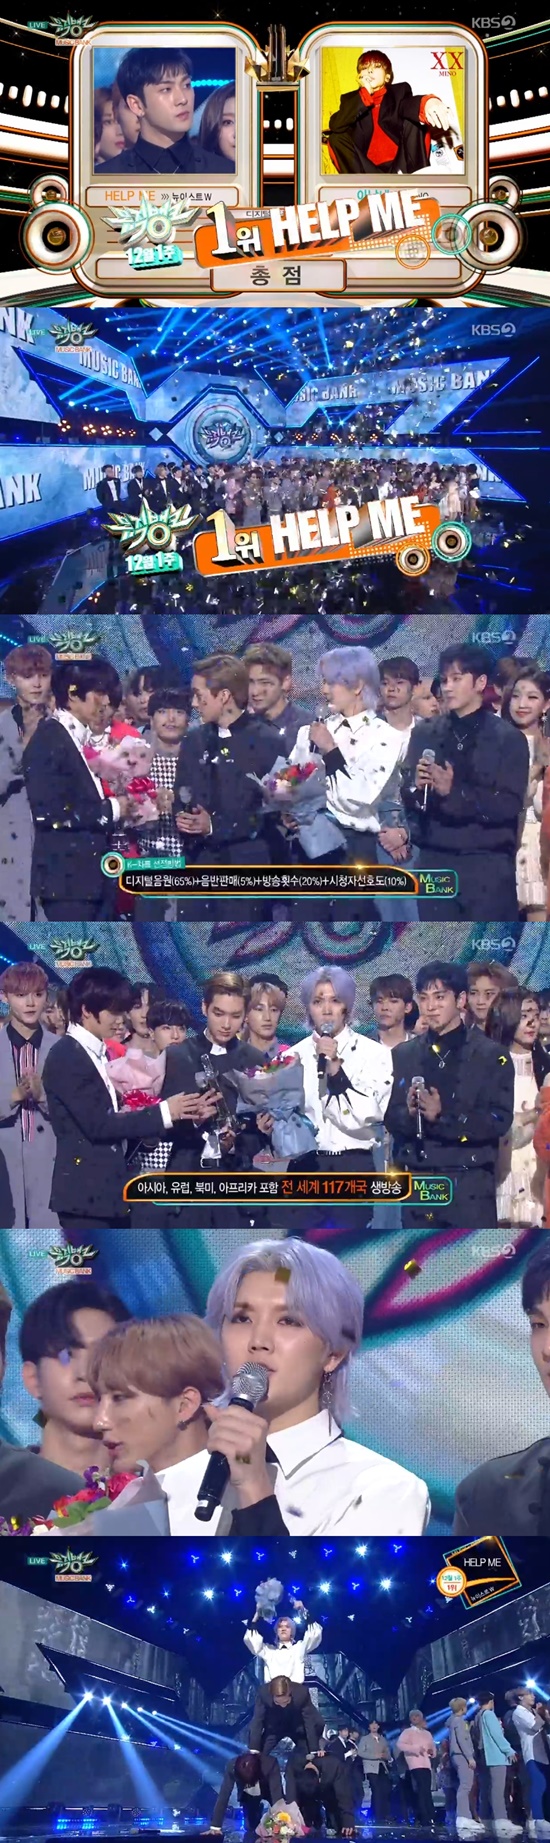 Stay good music...Wanna One Goodbye StageGroup NUESTW Music Bank first placeIn KBS 2TV Music Bank broadcasted on the 7th, NUESTW Help Me and Song Minho Anakne were the first placeHe was nominated: First placeIs back to NUESTW members who said, I am so grateful to my family and fans.I am grateful to the family who will be watching at home, he said. I will continue to visit with good music. He also showed the human tower ceremony, which was a promise on the encore stage.On the day, NUESTW took to the stage in a black and white costume, captivating Sight with an addictive chorus and charismatic look.This week, after last week, there were also various comebacks. This year, the third comeback, Godseven, shot the girl with a sweet stage.Ben and Uptension also finished their comeback stage, while Wanna One offered a good-bye stage at Music Bank.Wanna One, who has appeared in Music Bank seven times and Music Bank World Tour two times, has been singing Spring Wind.I remembered their last with a louder shout than any stage.In addition, 14U (one-possession), THE BOYZ, Golden Child, Nature (NATURE), Noir, Dream Notes (DreamNote), Lovelies, Red Velvet, Voyager, Soran, Yubin, and Key appeared to fill the stage.Every Friday at 5 p.m. / Photo = KBS 2TV